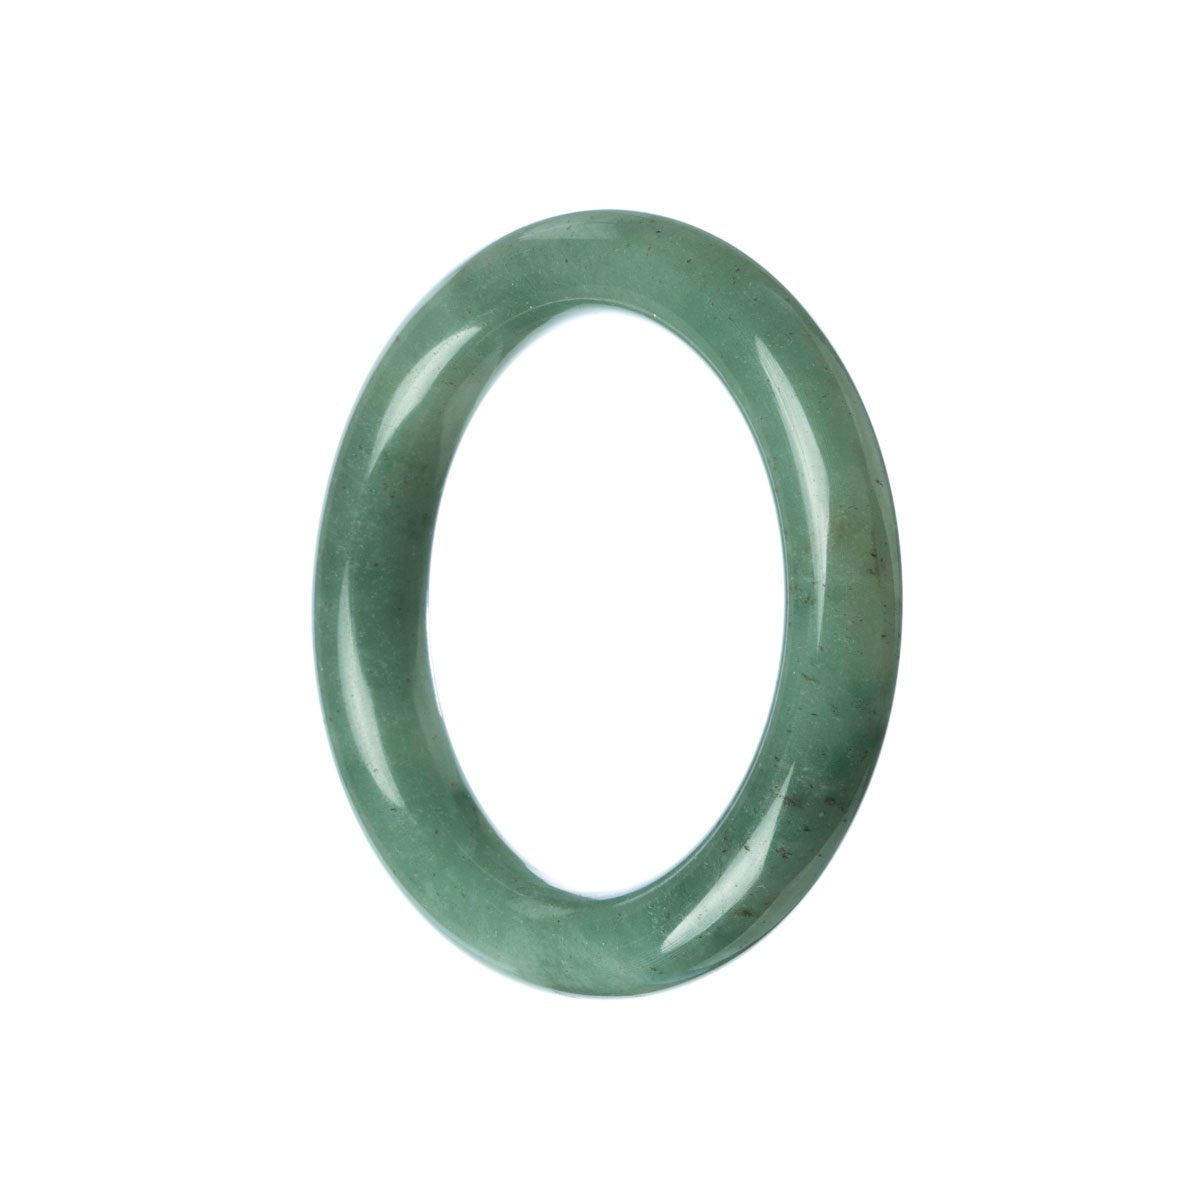 A close-up of a beautiful green jade bracelet with a round shape, measuring 51mm in diameter. The bracelet is made of genuine Grade A green jade and is a product of MAYS™.